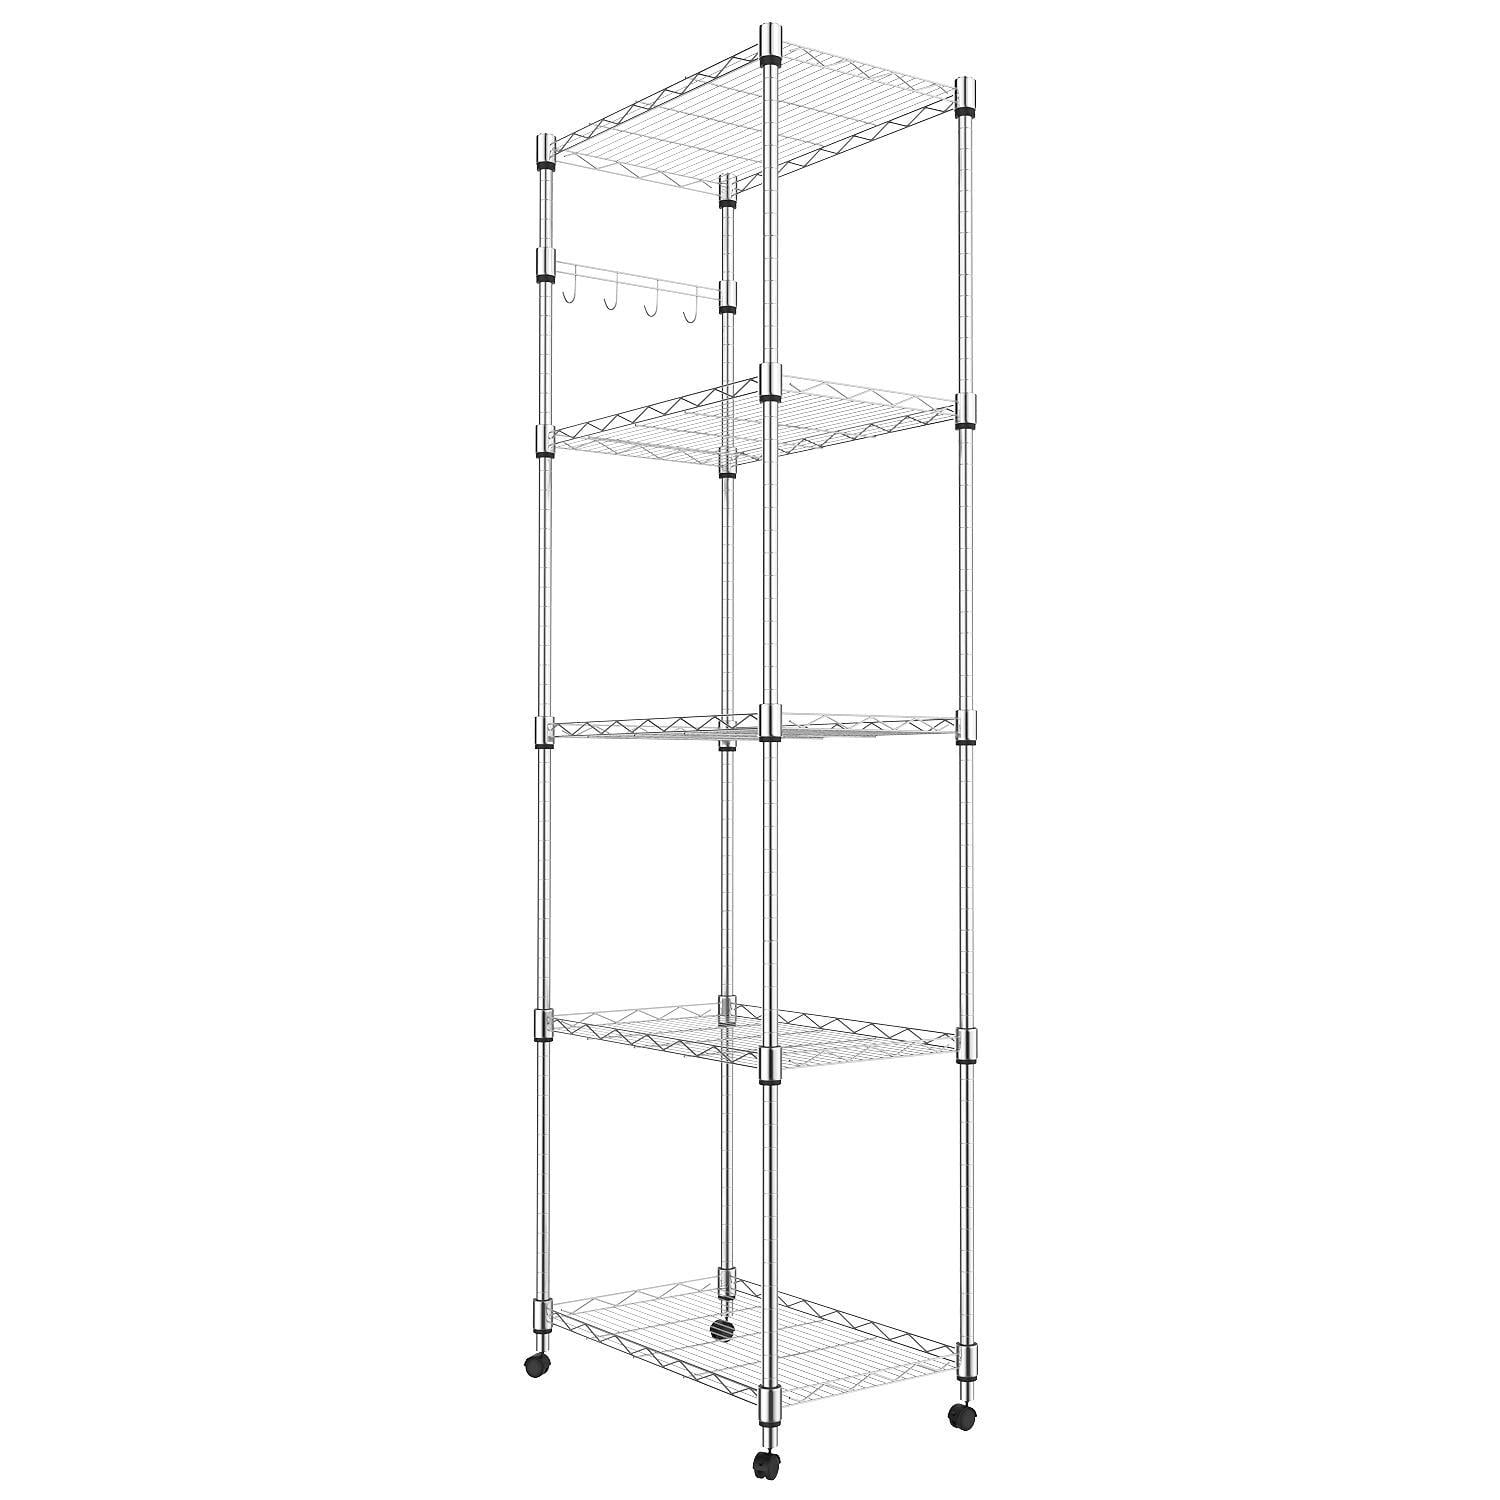 Details about   5 Tier Shelf Adjustable Wire Metal Shelving Rack w/Rolling Home Storage Cart